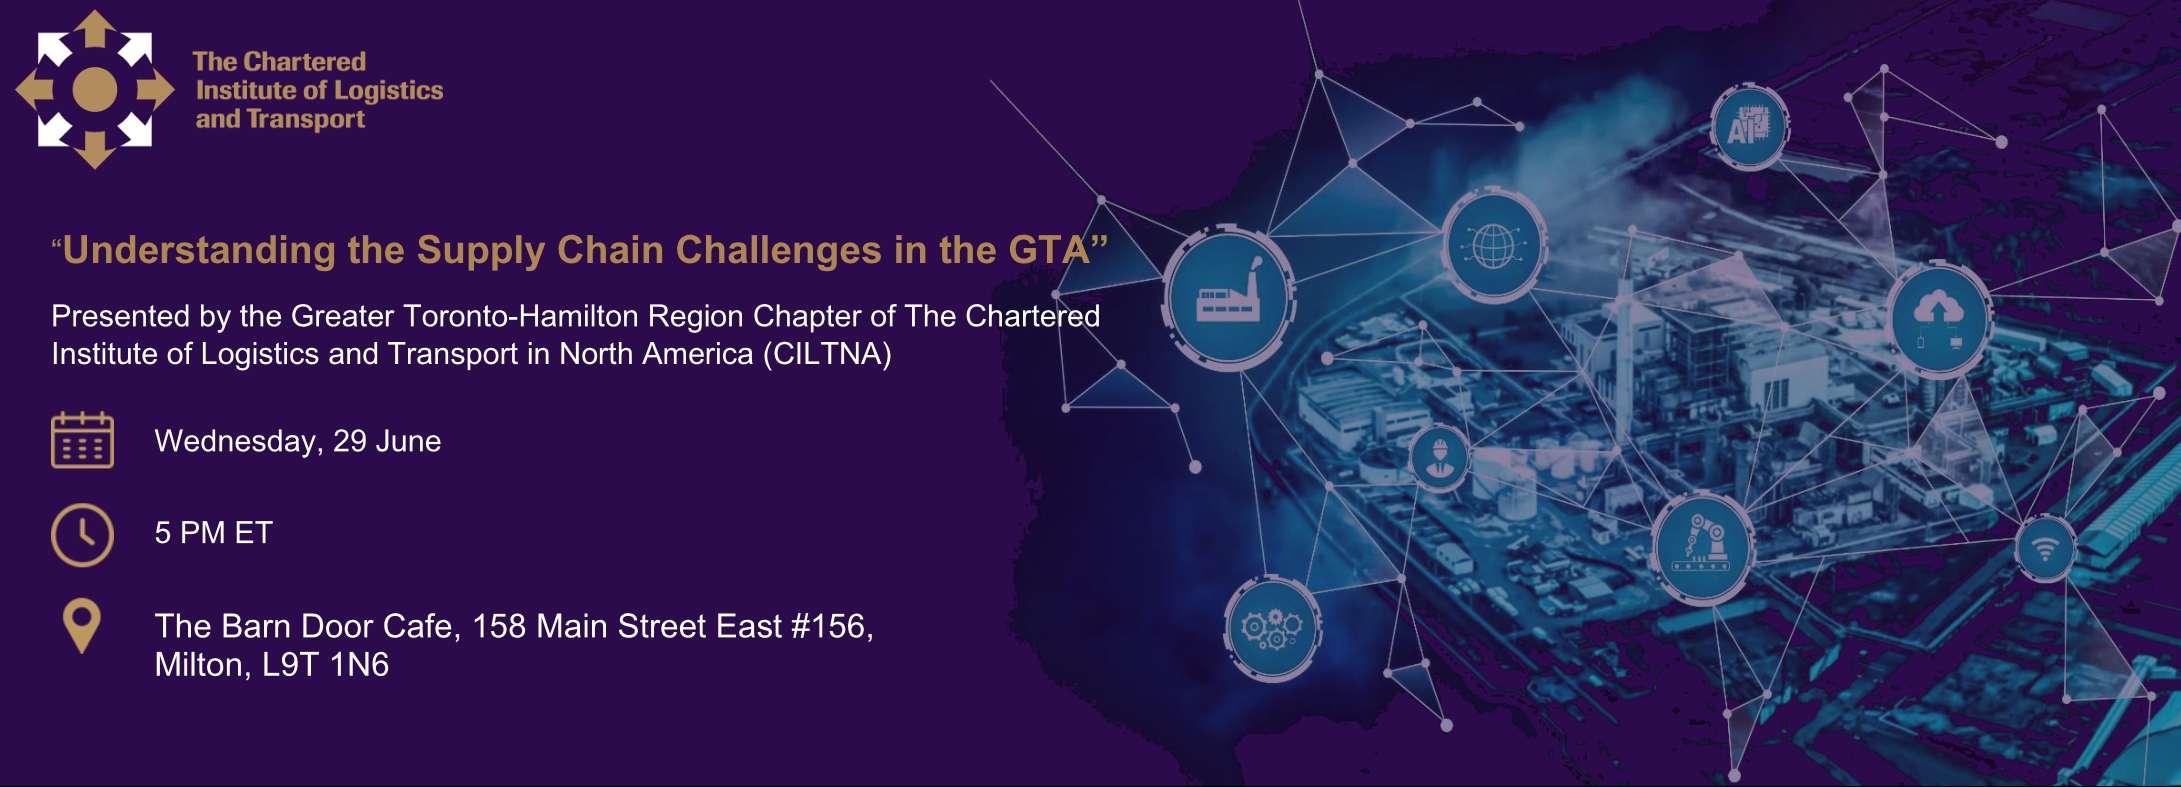 NEW EVENT DATE! Join the Greater Toronto-Hamilton Region Chapter of The Chartered Institute of Logistics and Transport in North America (CILTNA) for “Understanding the Supply Chain Challenges in the GTA”